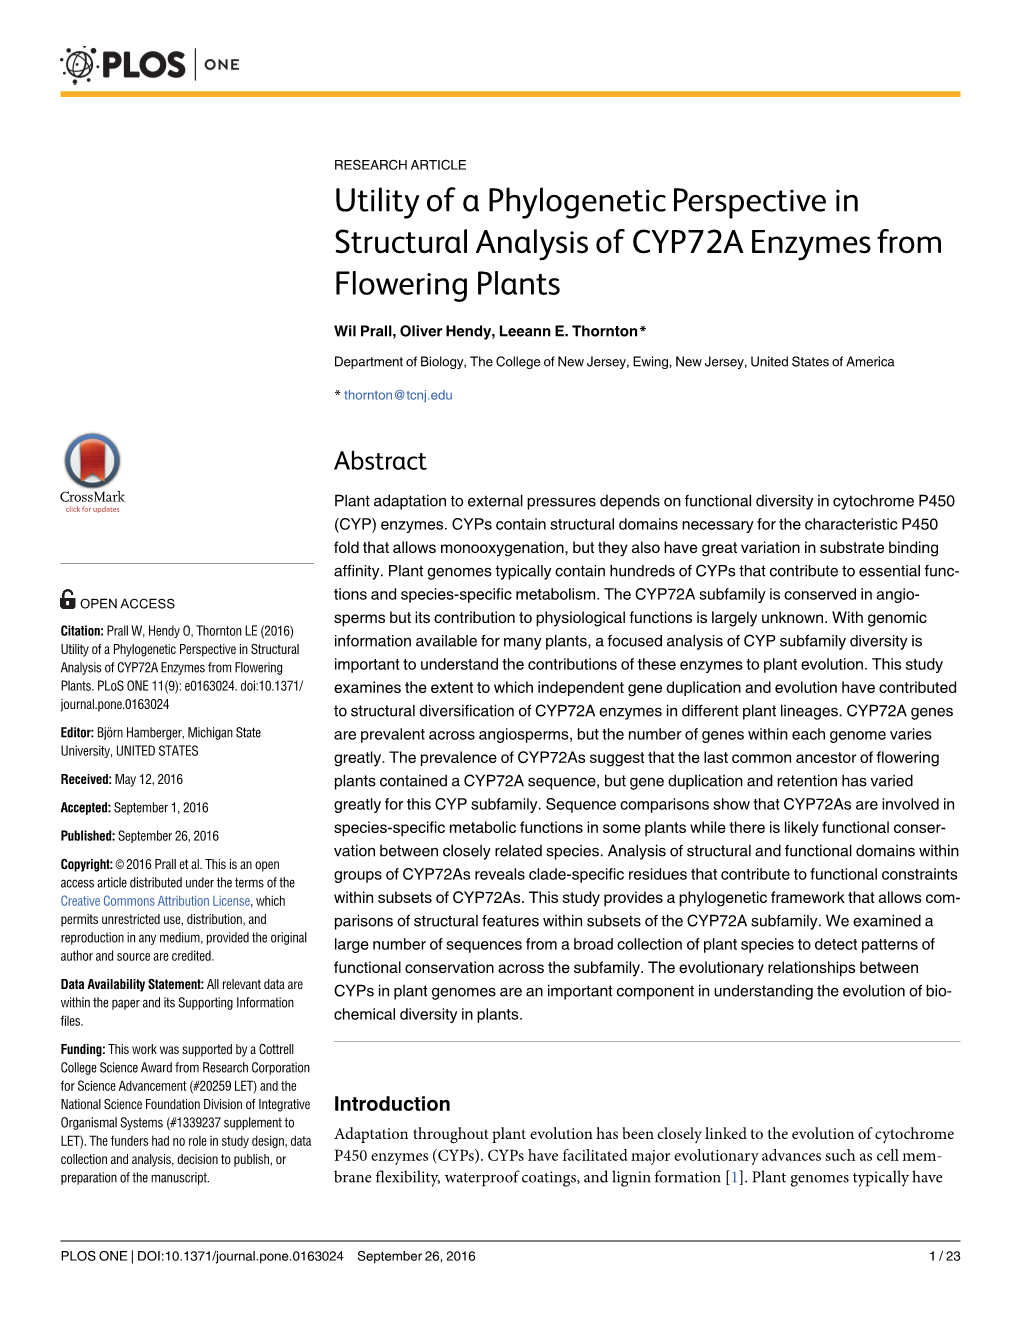 Utility of a Phylogenetic Perspective in Structural Analysis of CYP72A Enzymes from Flowering Plants